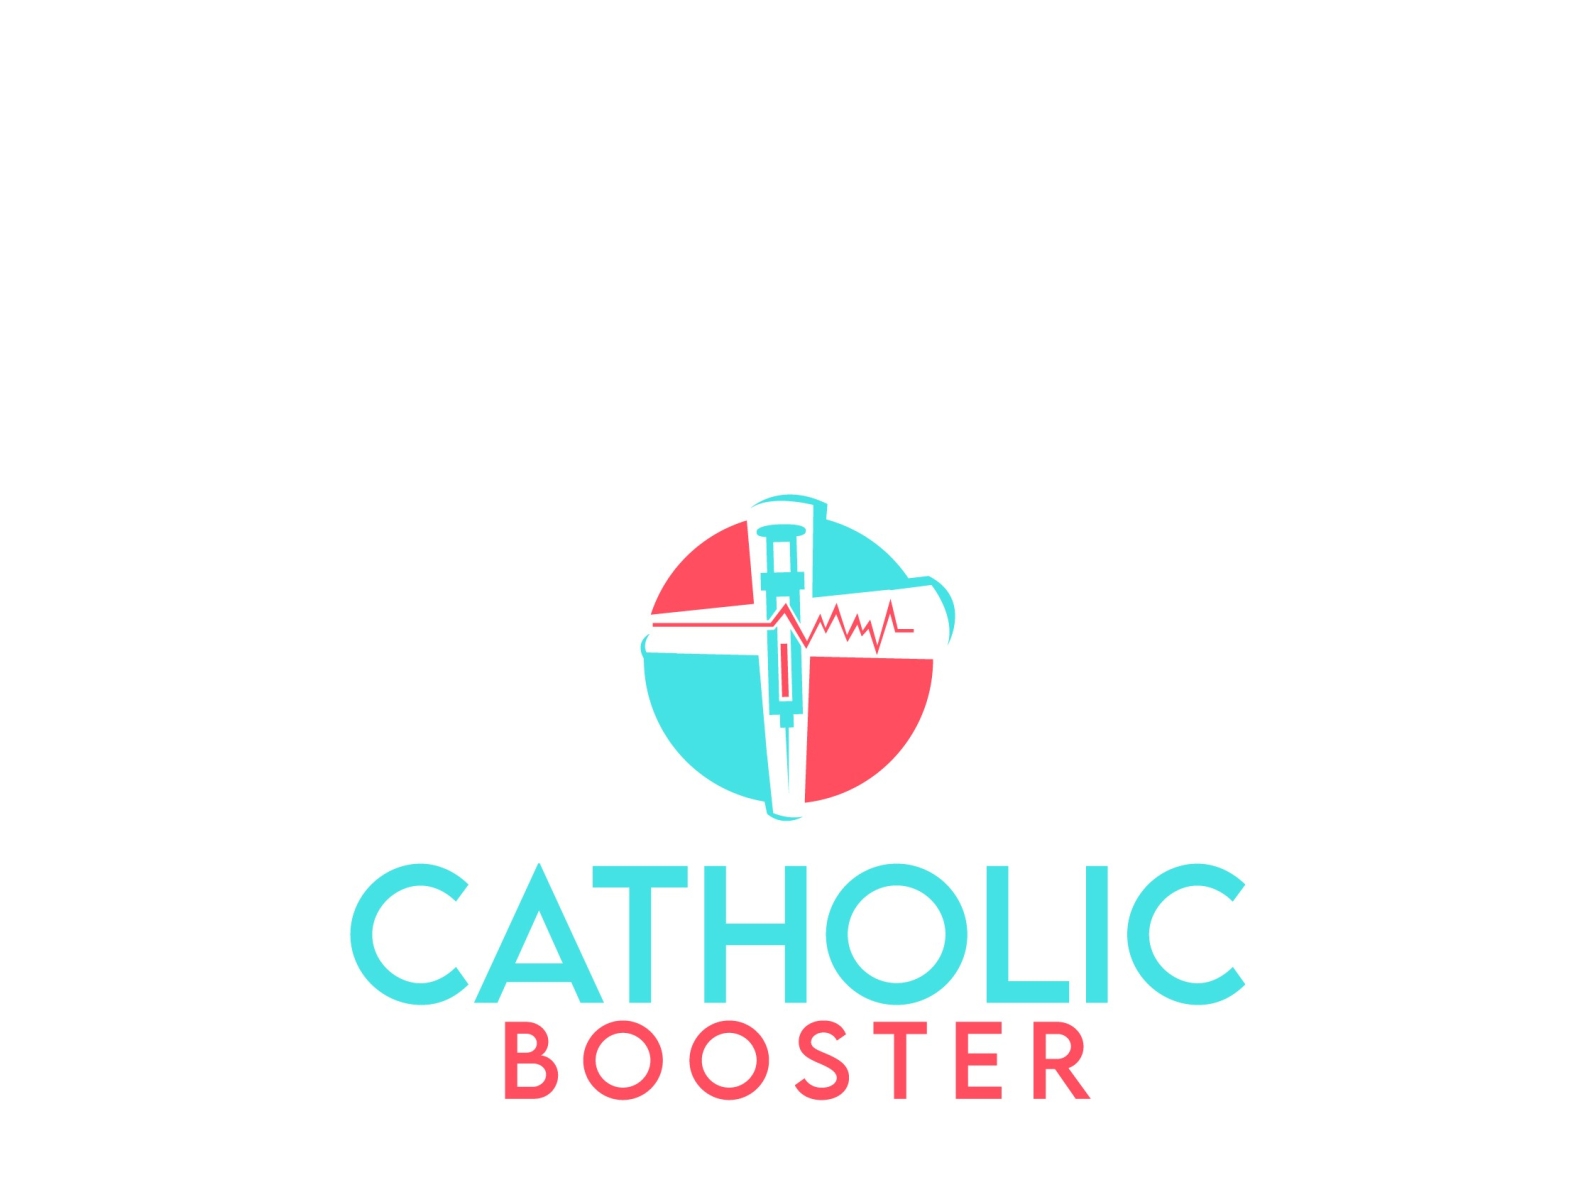 Catholic Booster by Ryan Bilodeau on Dribbble